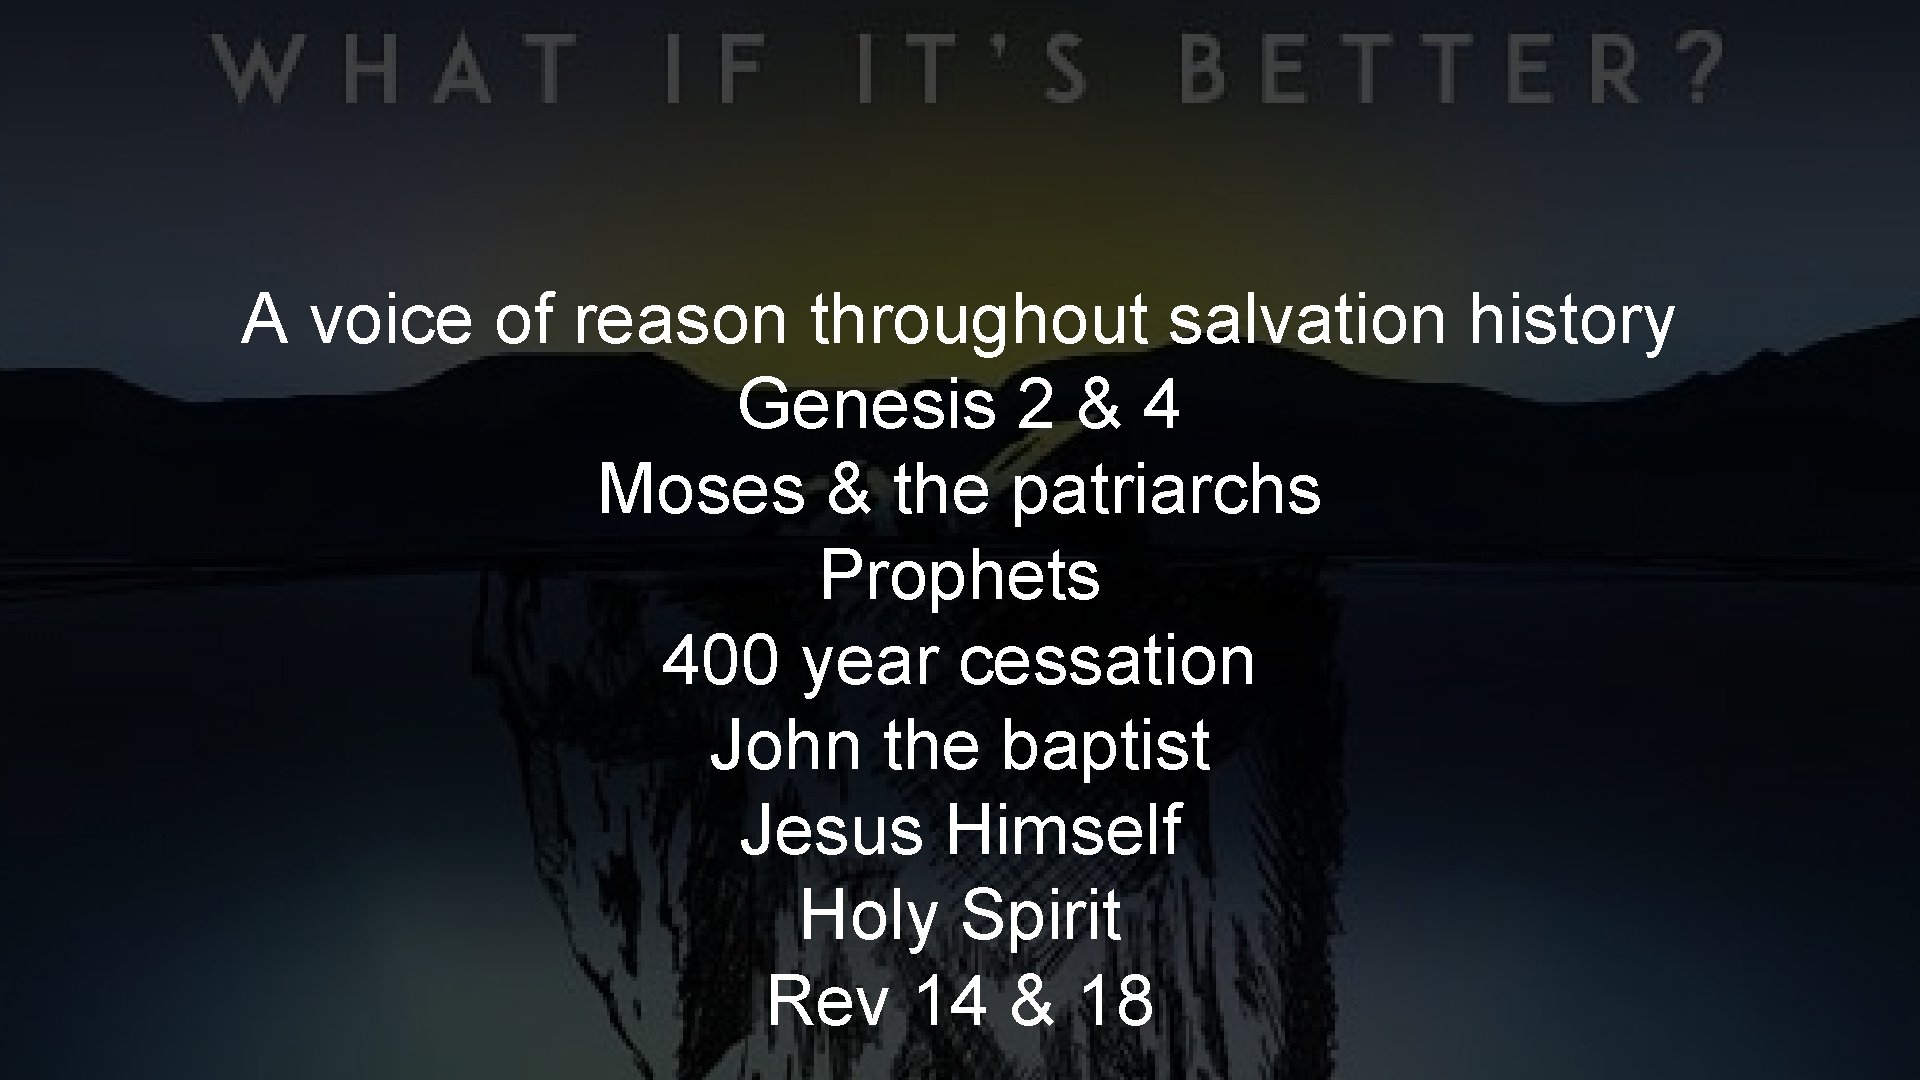 A voice of reason throughout salvation history Genesis 2 & 4 Moses & the